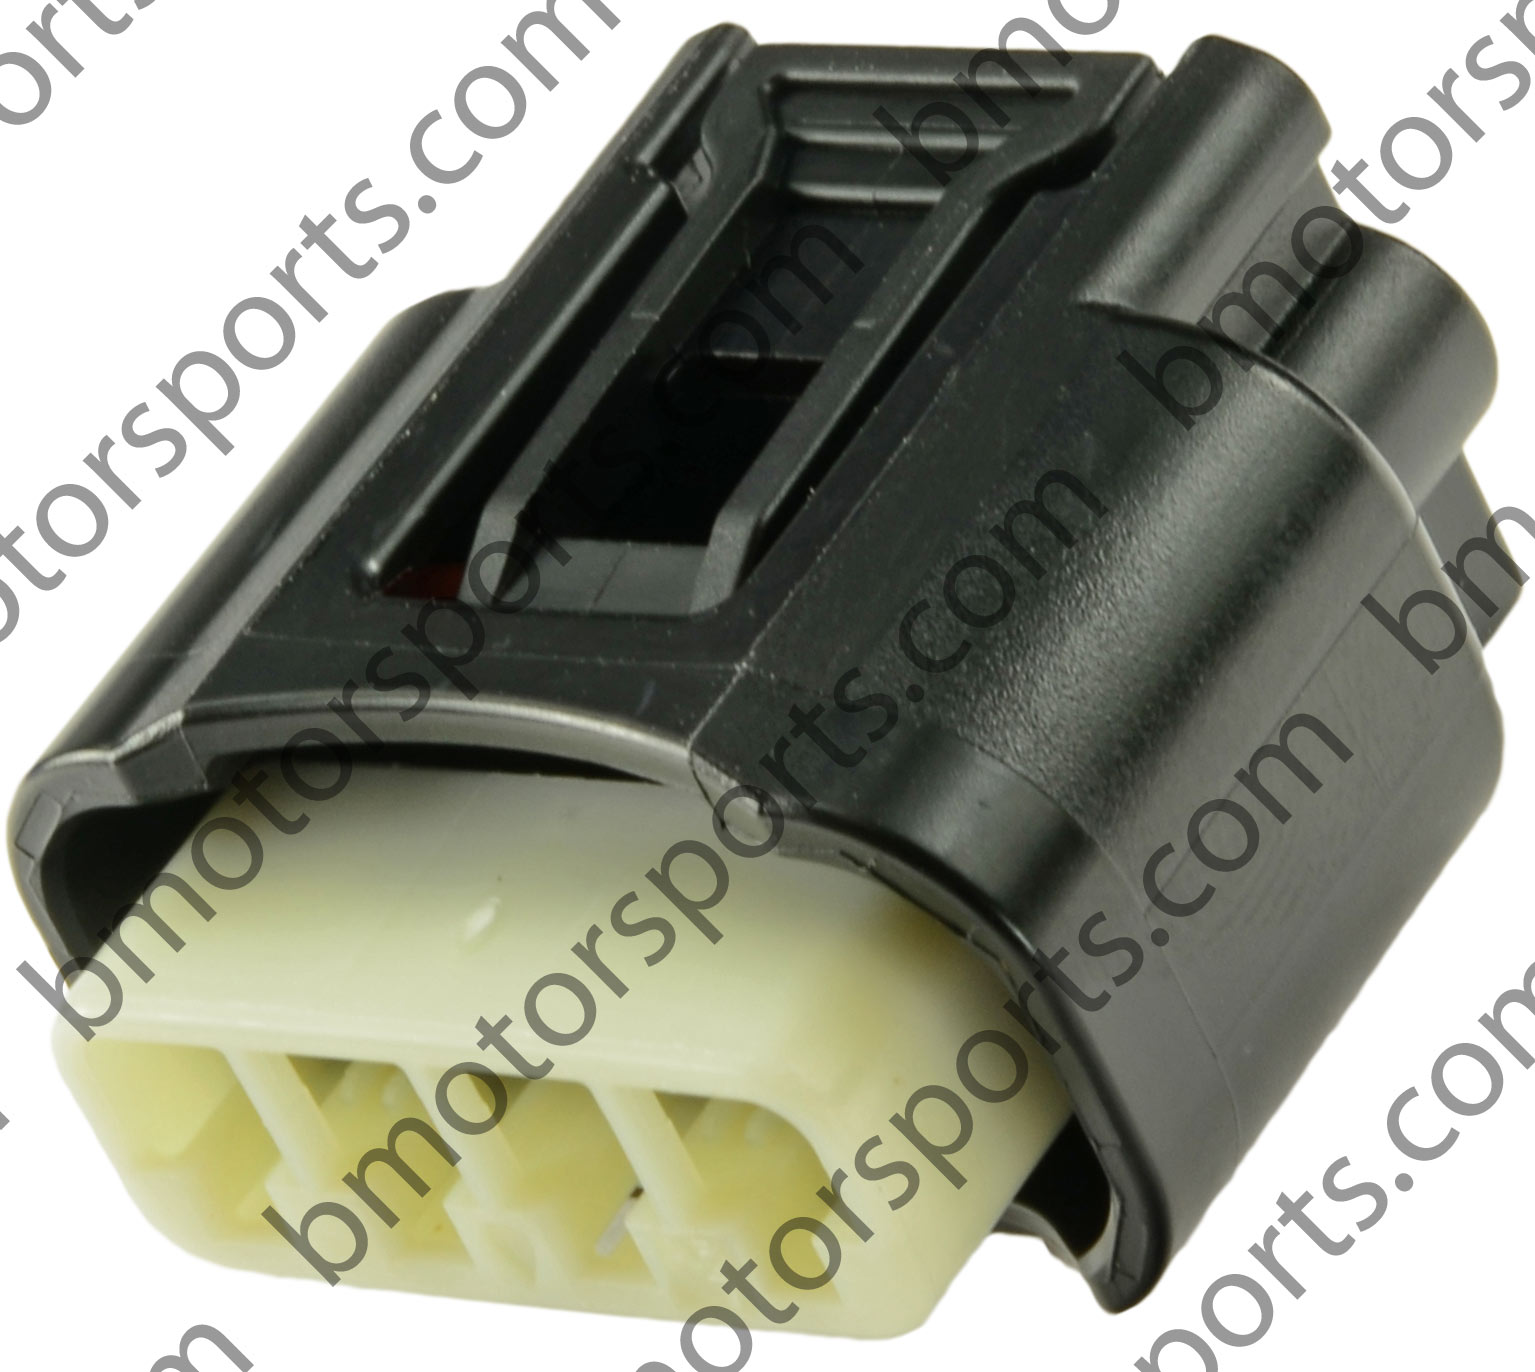 Toyota ignition coil connector